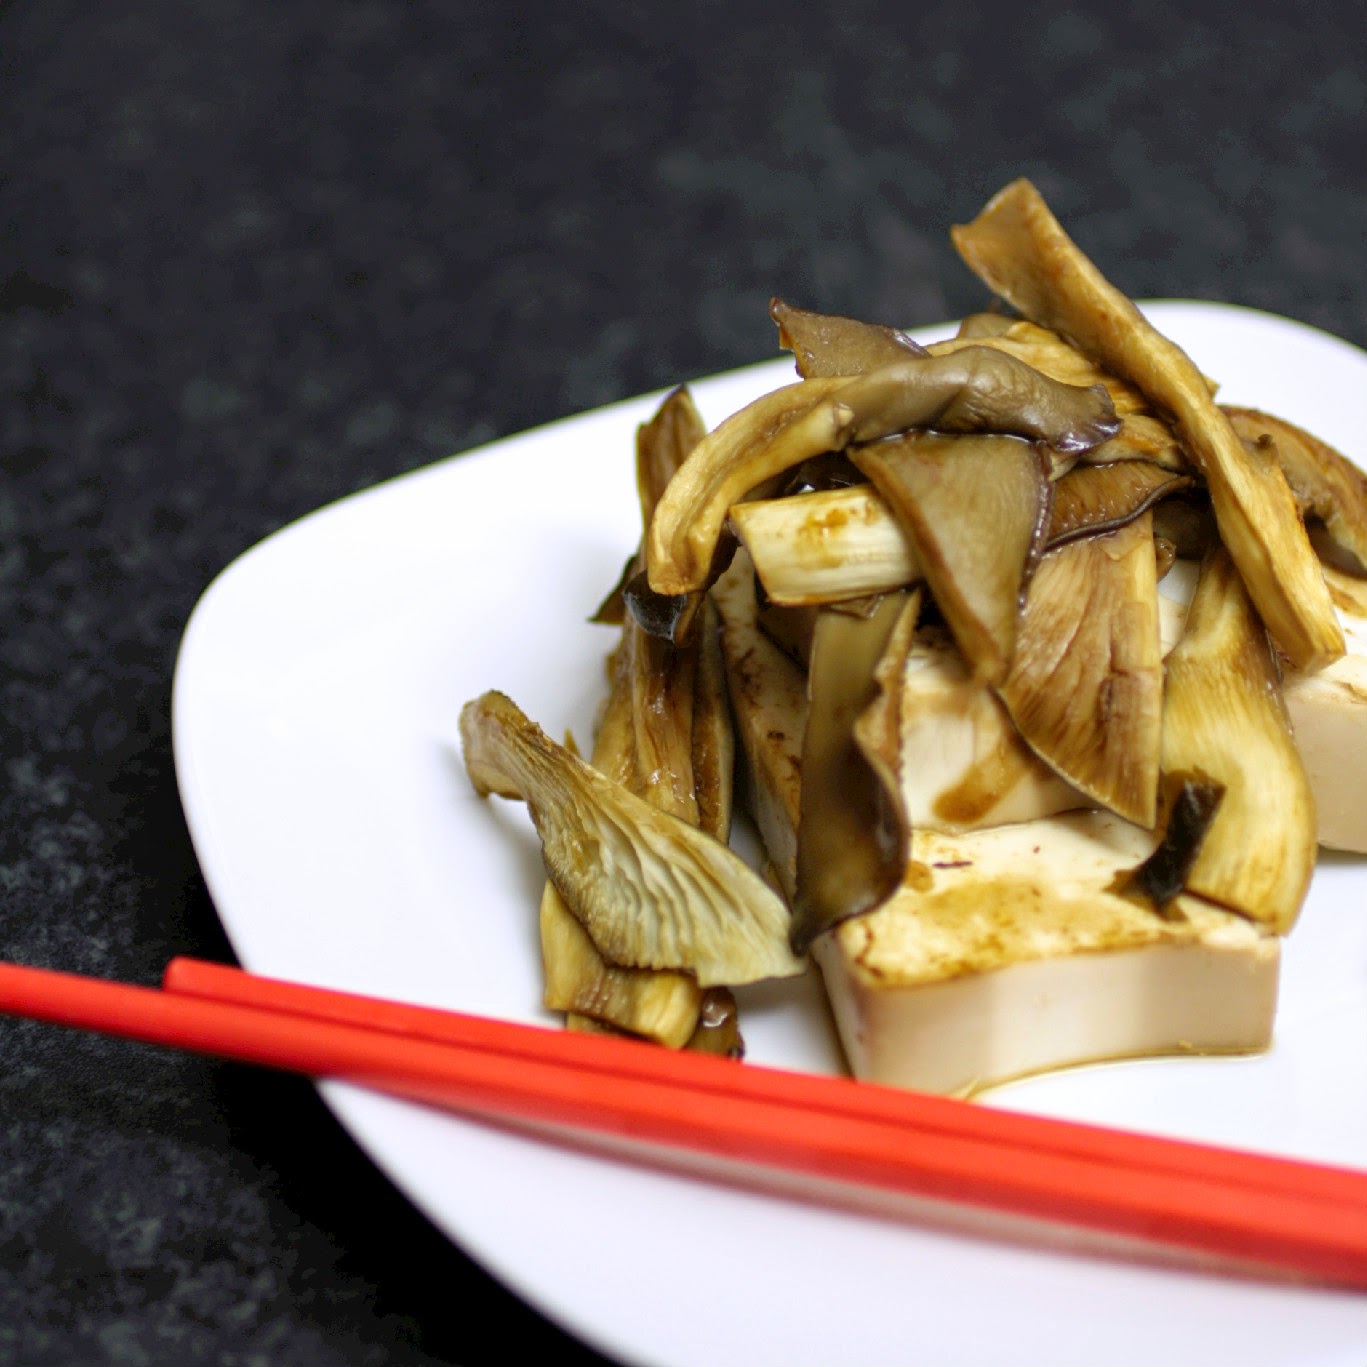 Home grown oyster mushrooms with griddled tofu.  I wanted the mushrooms to be the star of the dish so used a simple marinade for the tofu using soy sauce, miso paste and sesame oil.